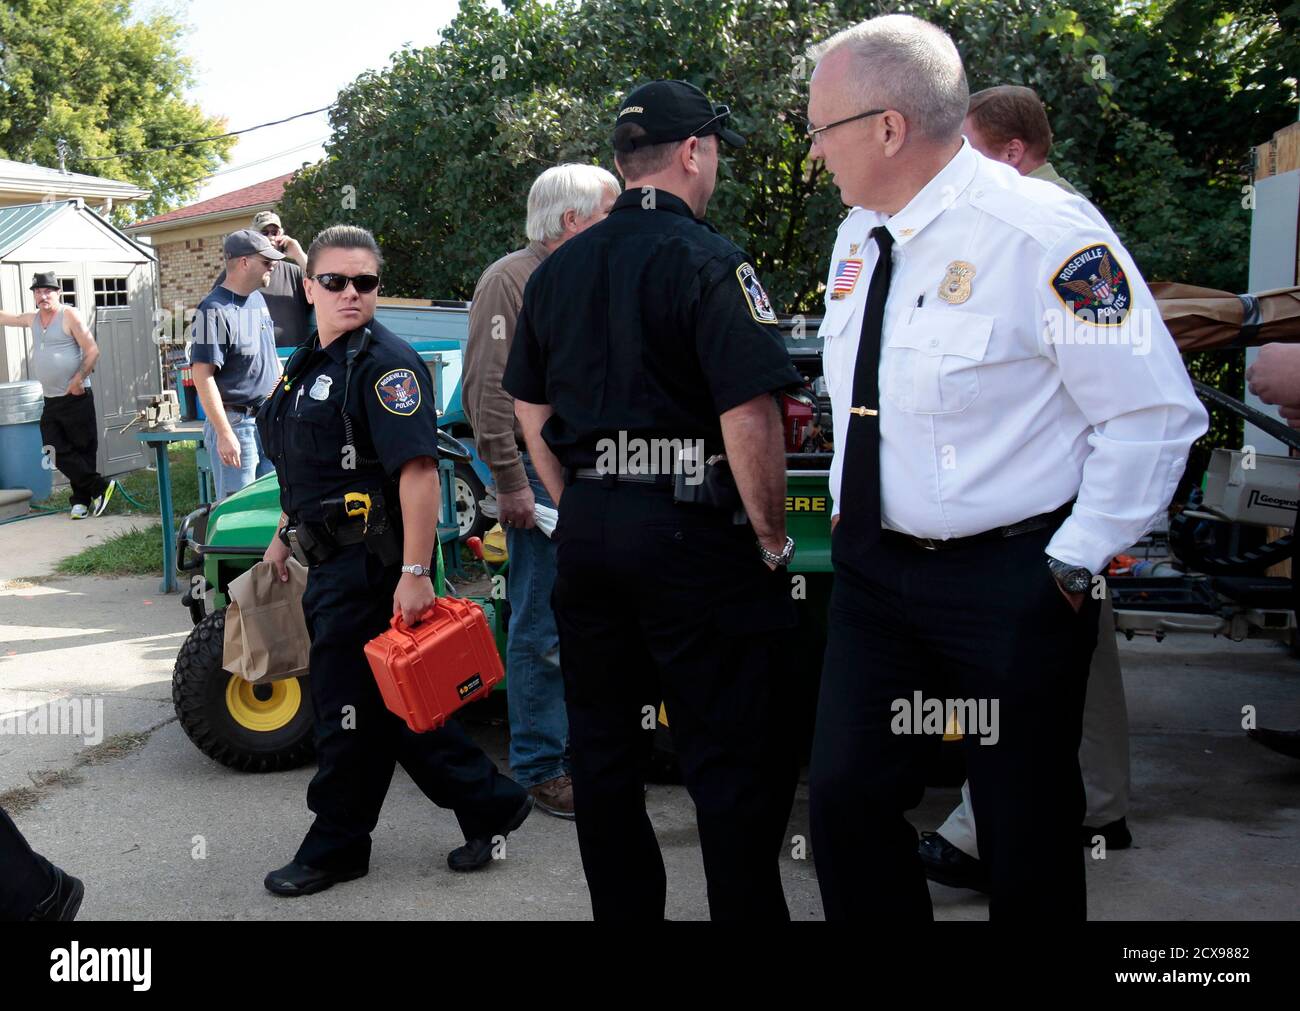 Roseville police officers carry in paper bags the wet soil samples removed from under a concrete driveway in the latest effort to find the remains of Teamsters union leader Jimmy Hoffa, who disappeared in 1975,  in a residential neighborhood of Roseville, Michigan September 28, 2012.    REUTERS/Rebecca Cook  (UNITED STATES - Tags: CRIME LAW) Stock Photo